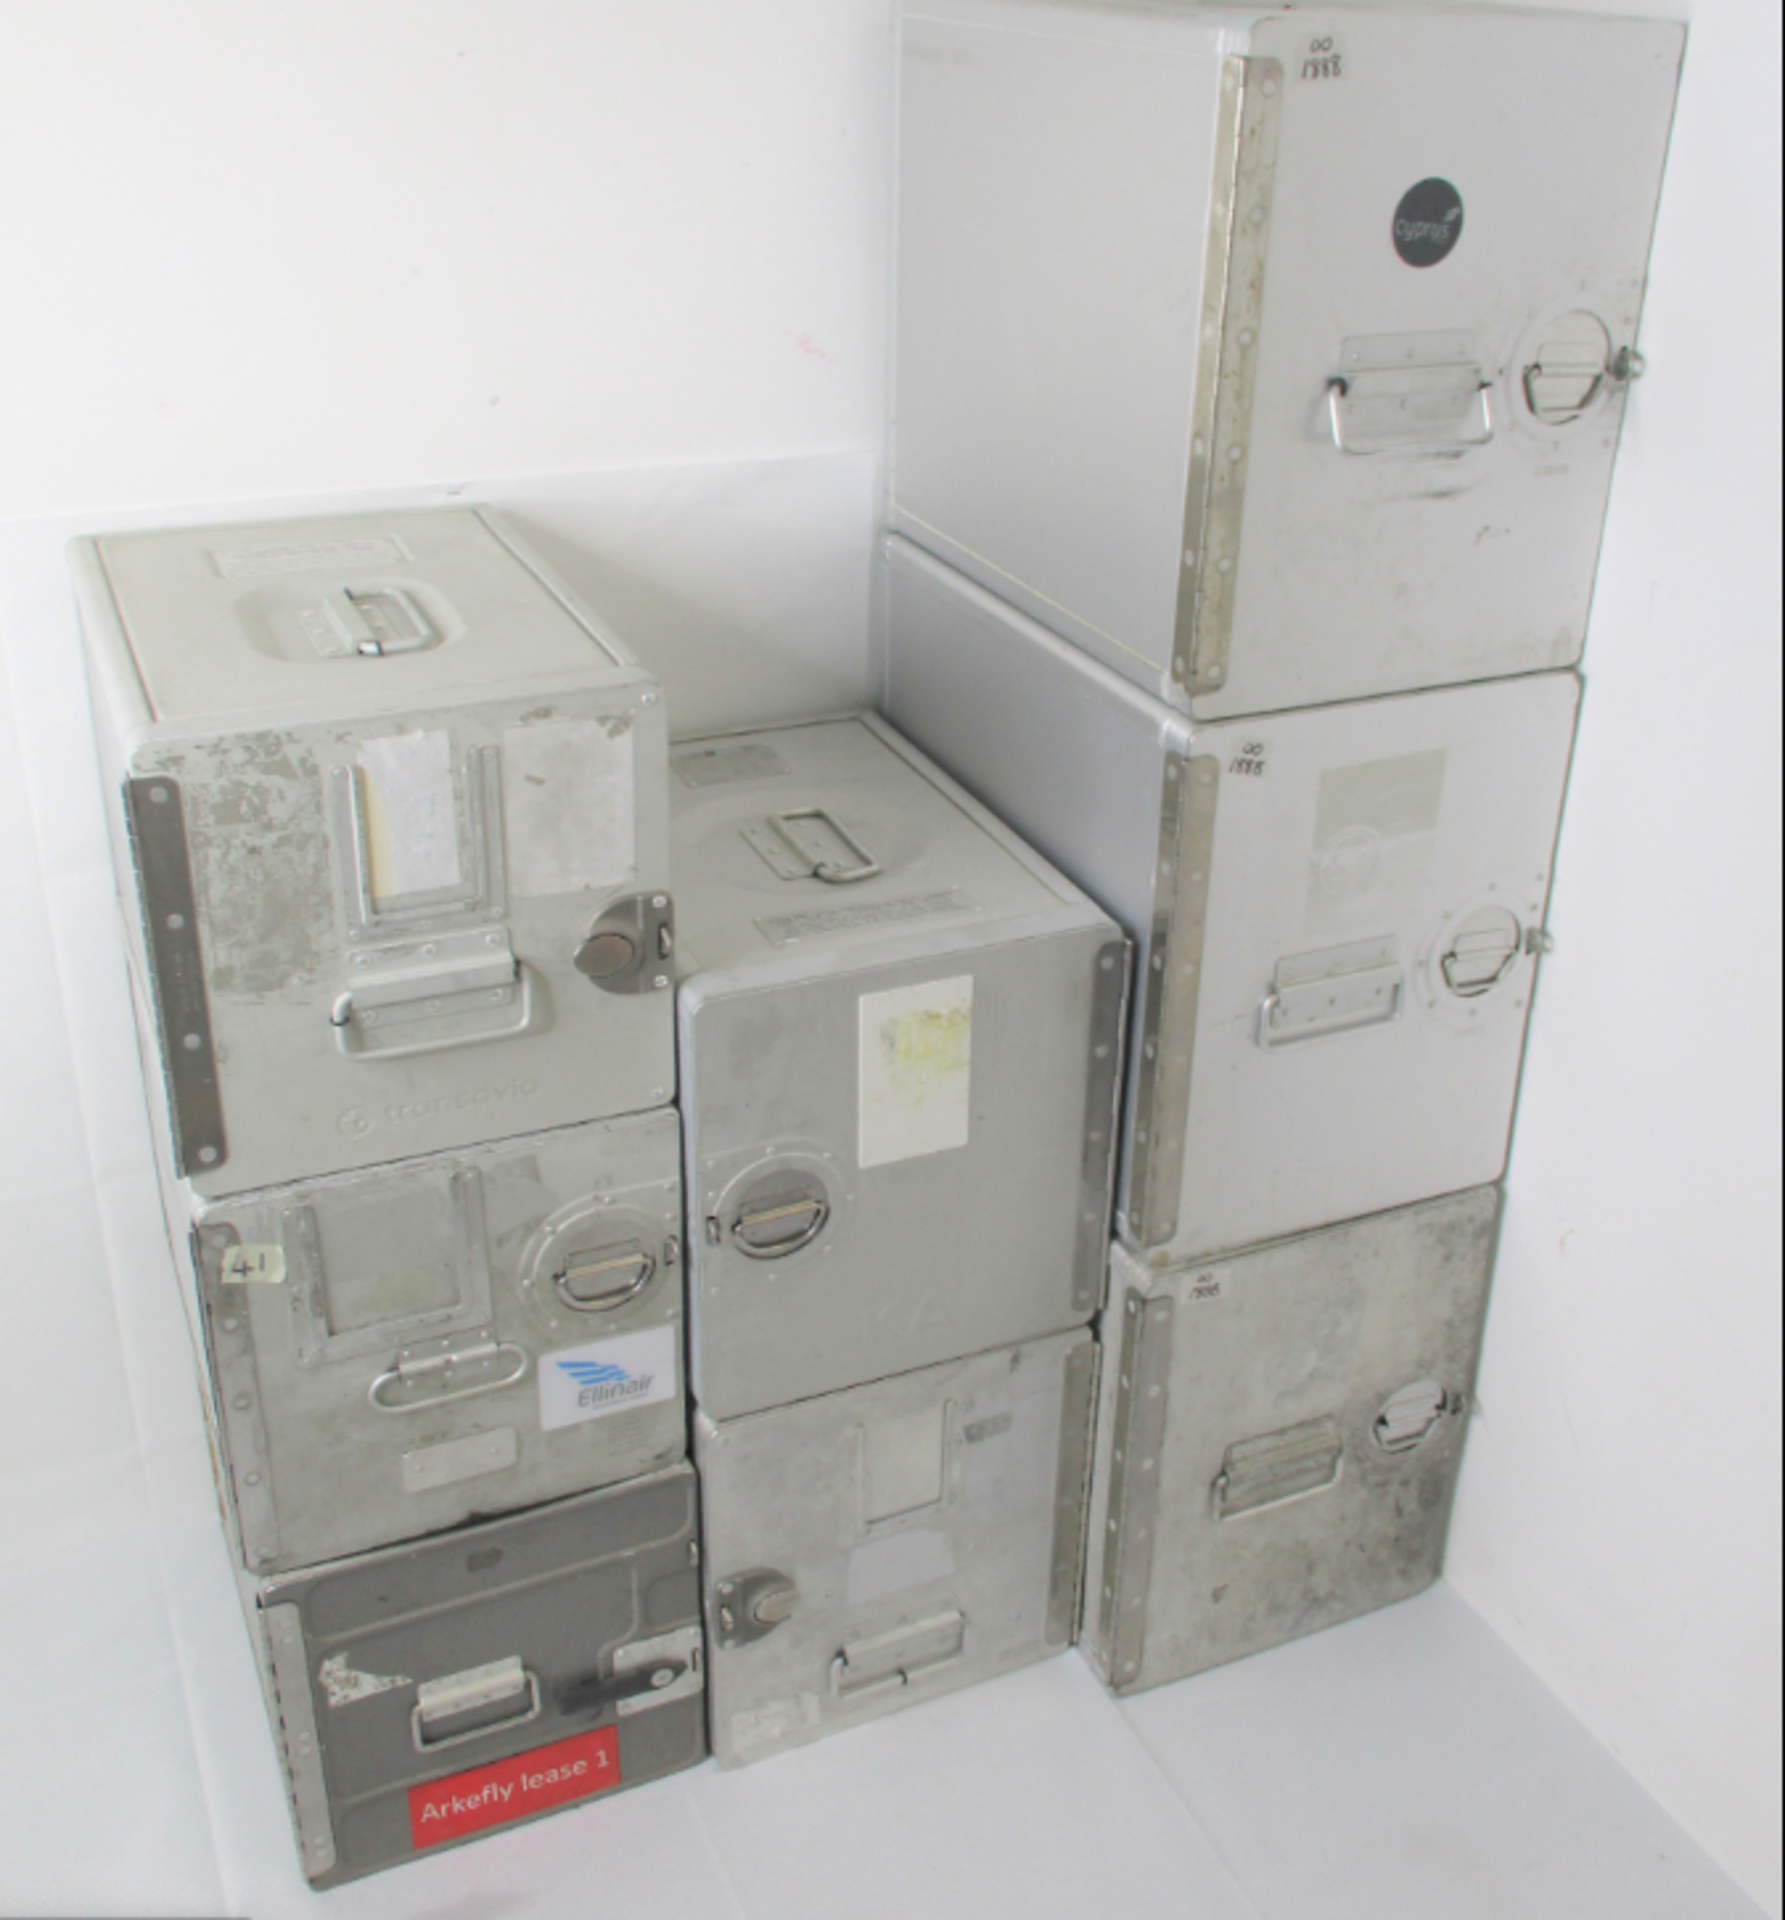 Aircraft Galley Metal Stowage with content practical and memorable storage - Image 3 of 4